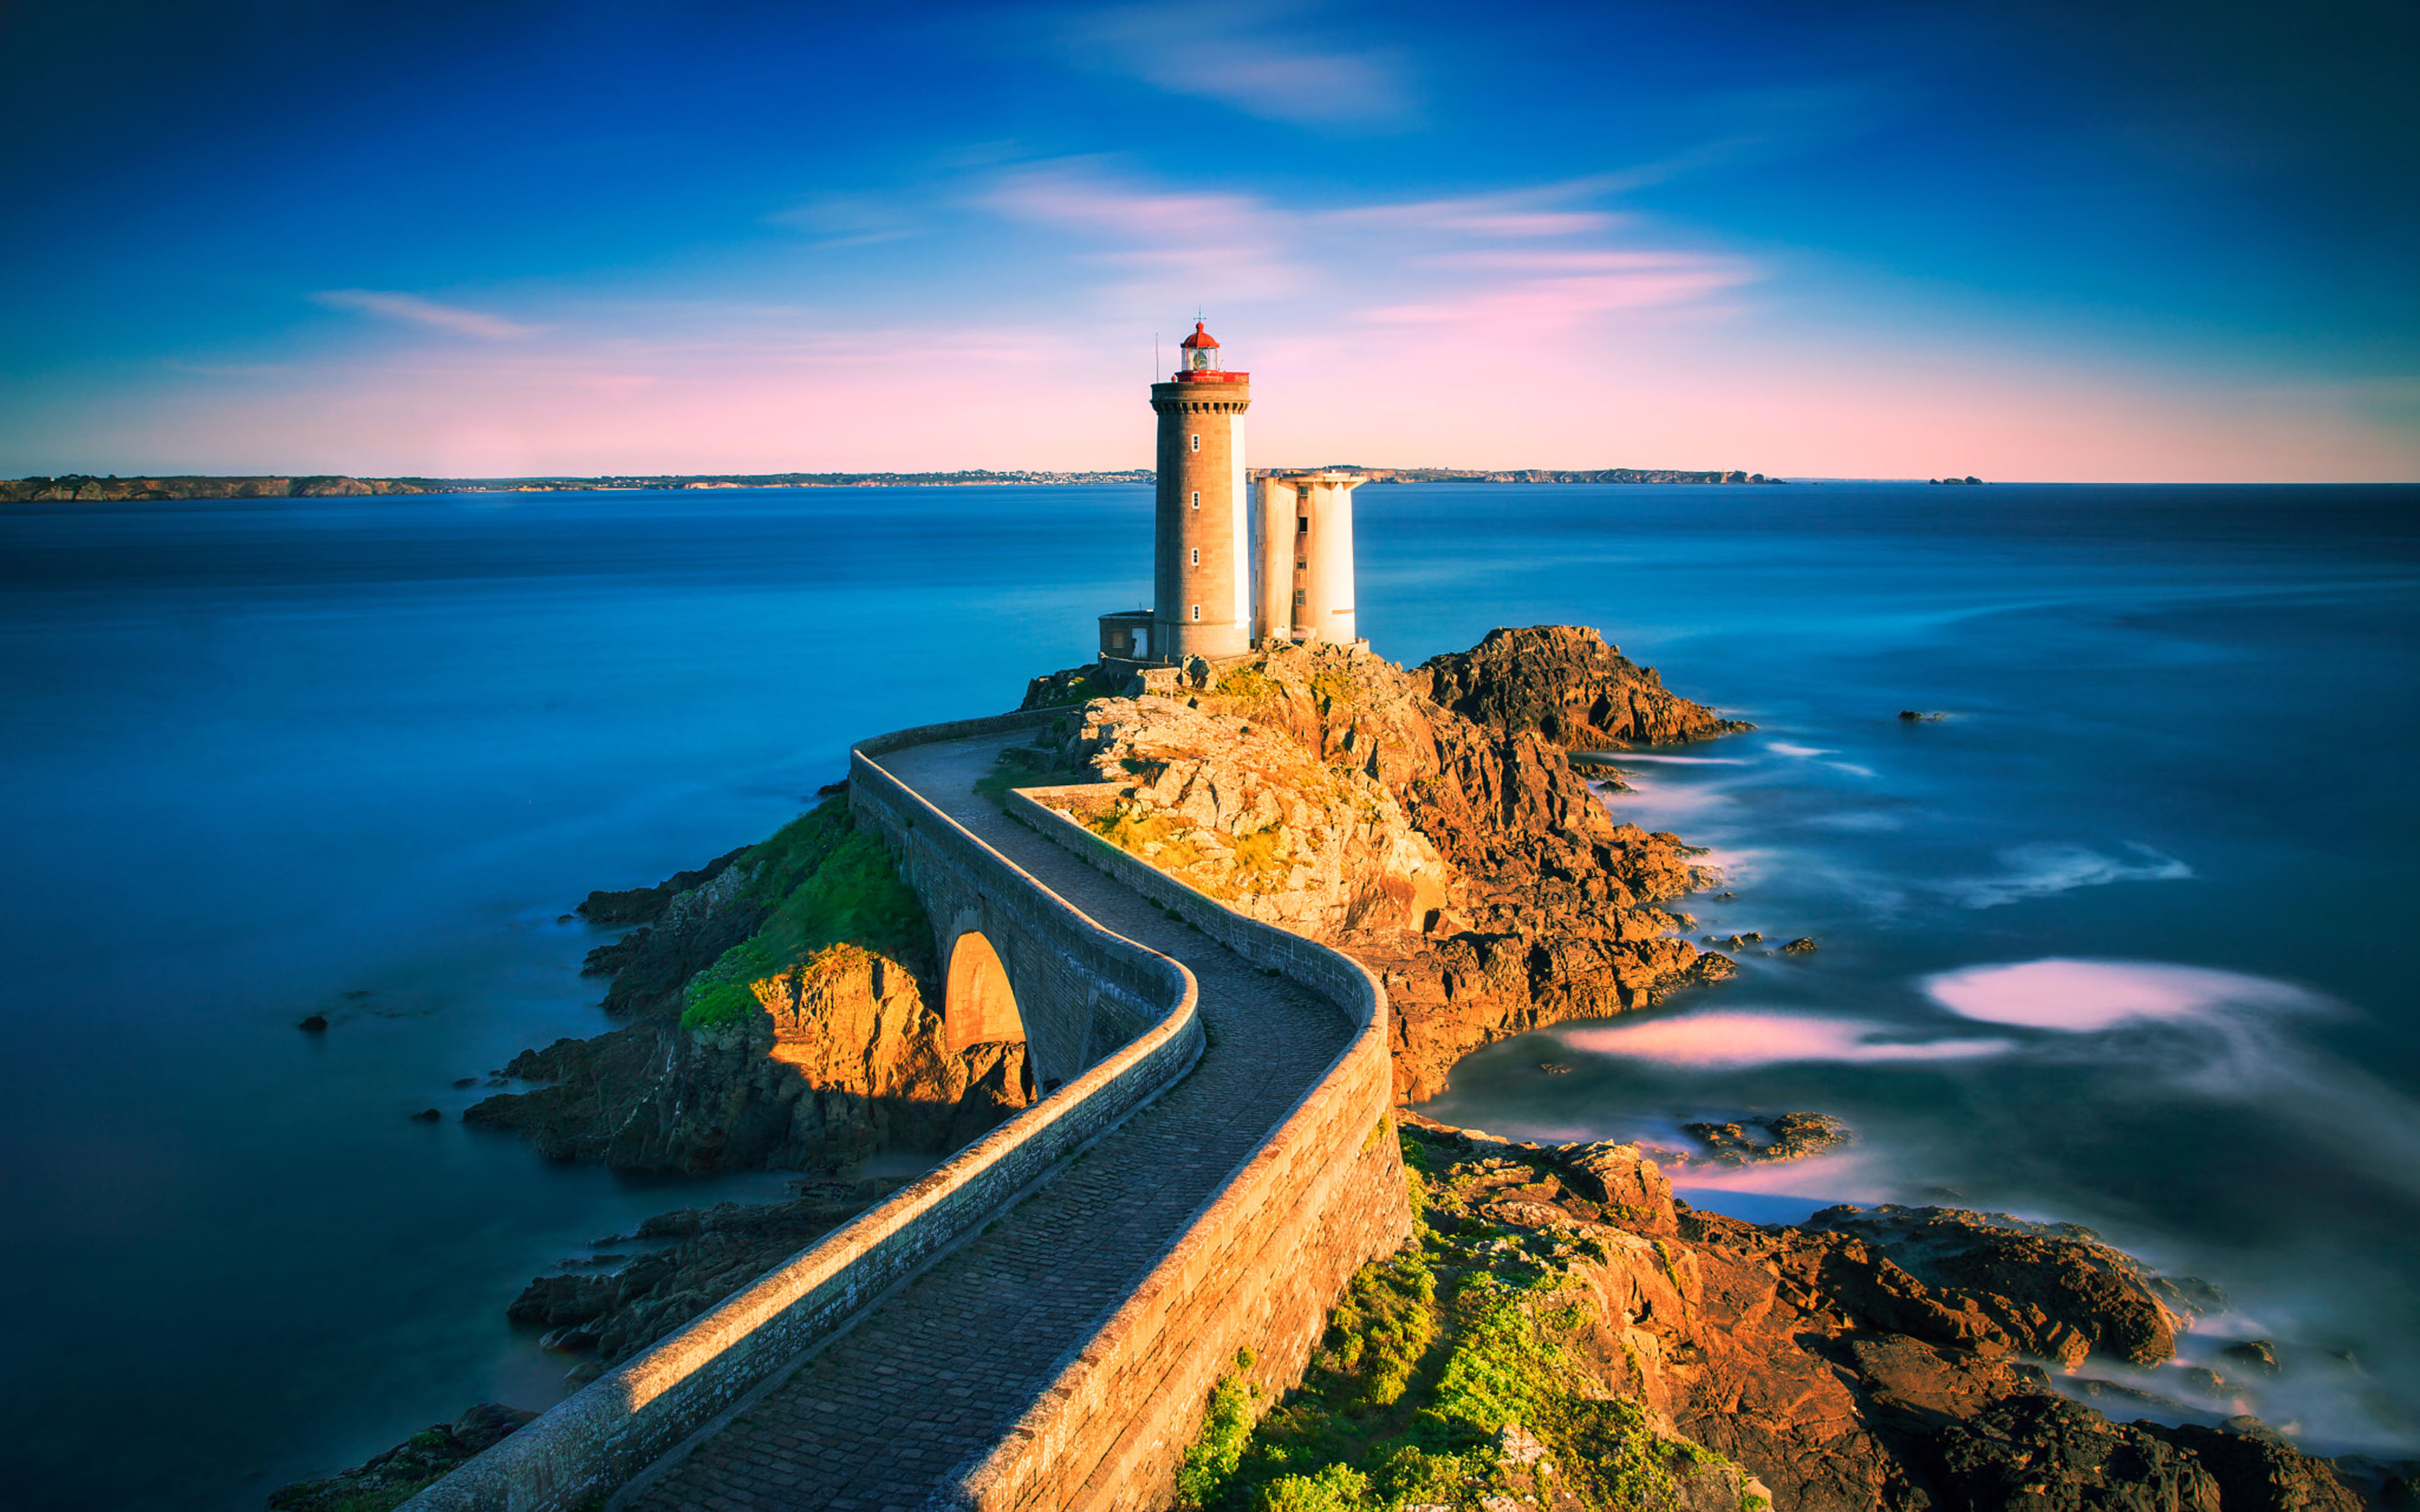 Phare Du Petit Minou Lighthouse In The Roadstead Of Brest Stands